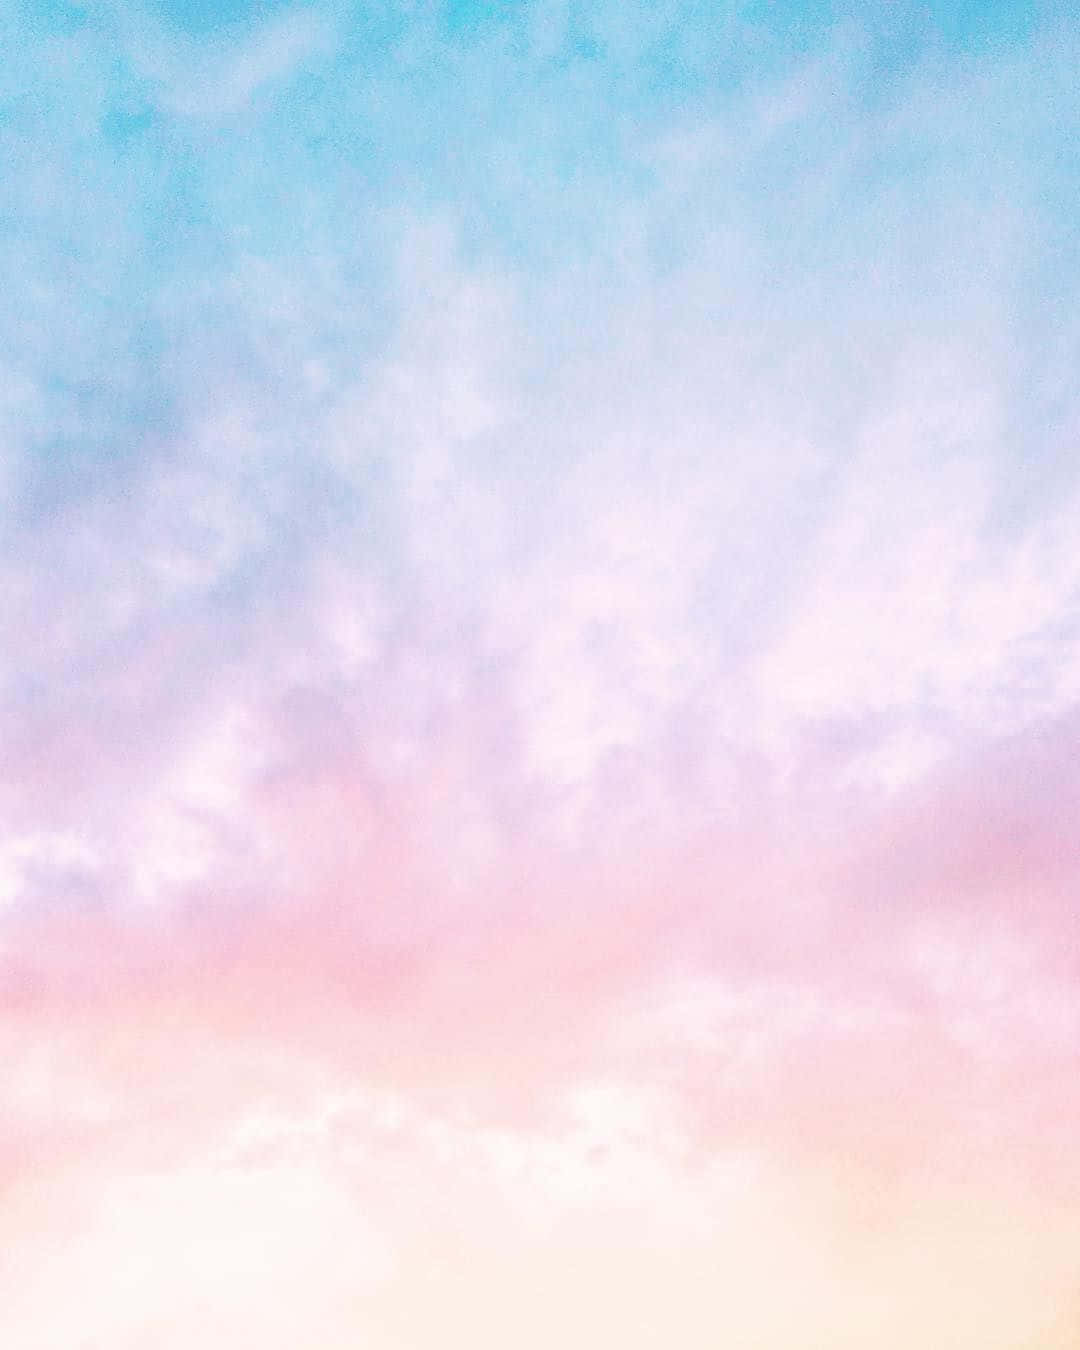 Aesthetic Pastel Clouds Cotton Candy Inspired Background